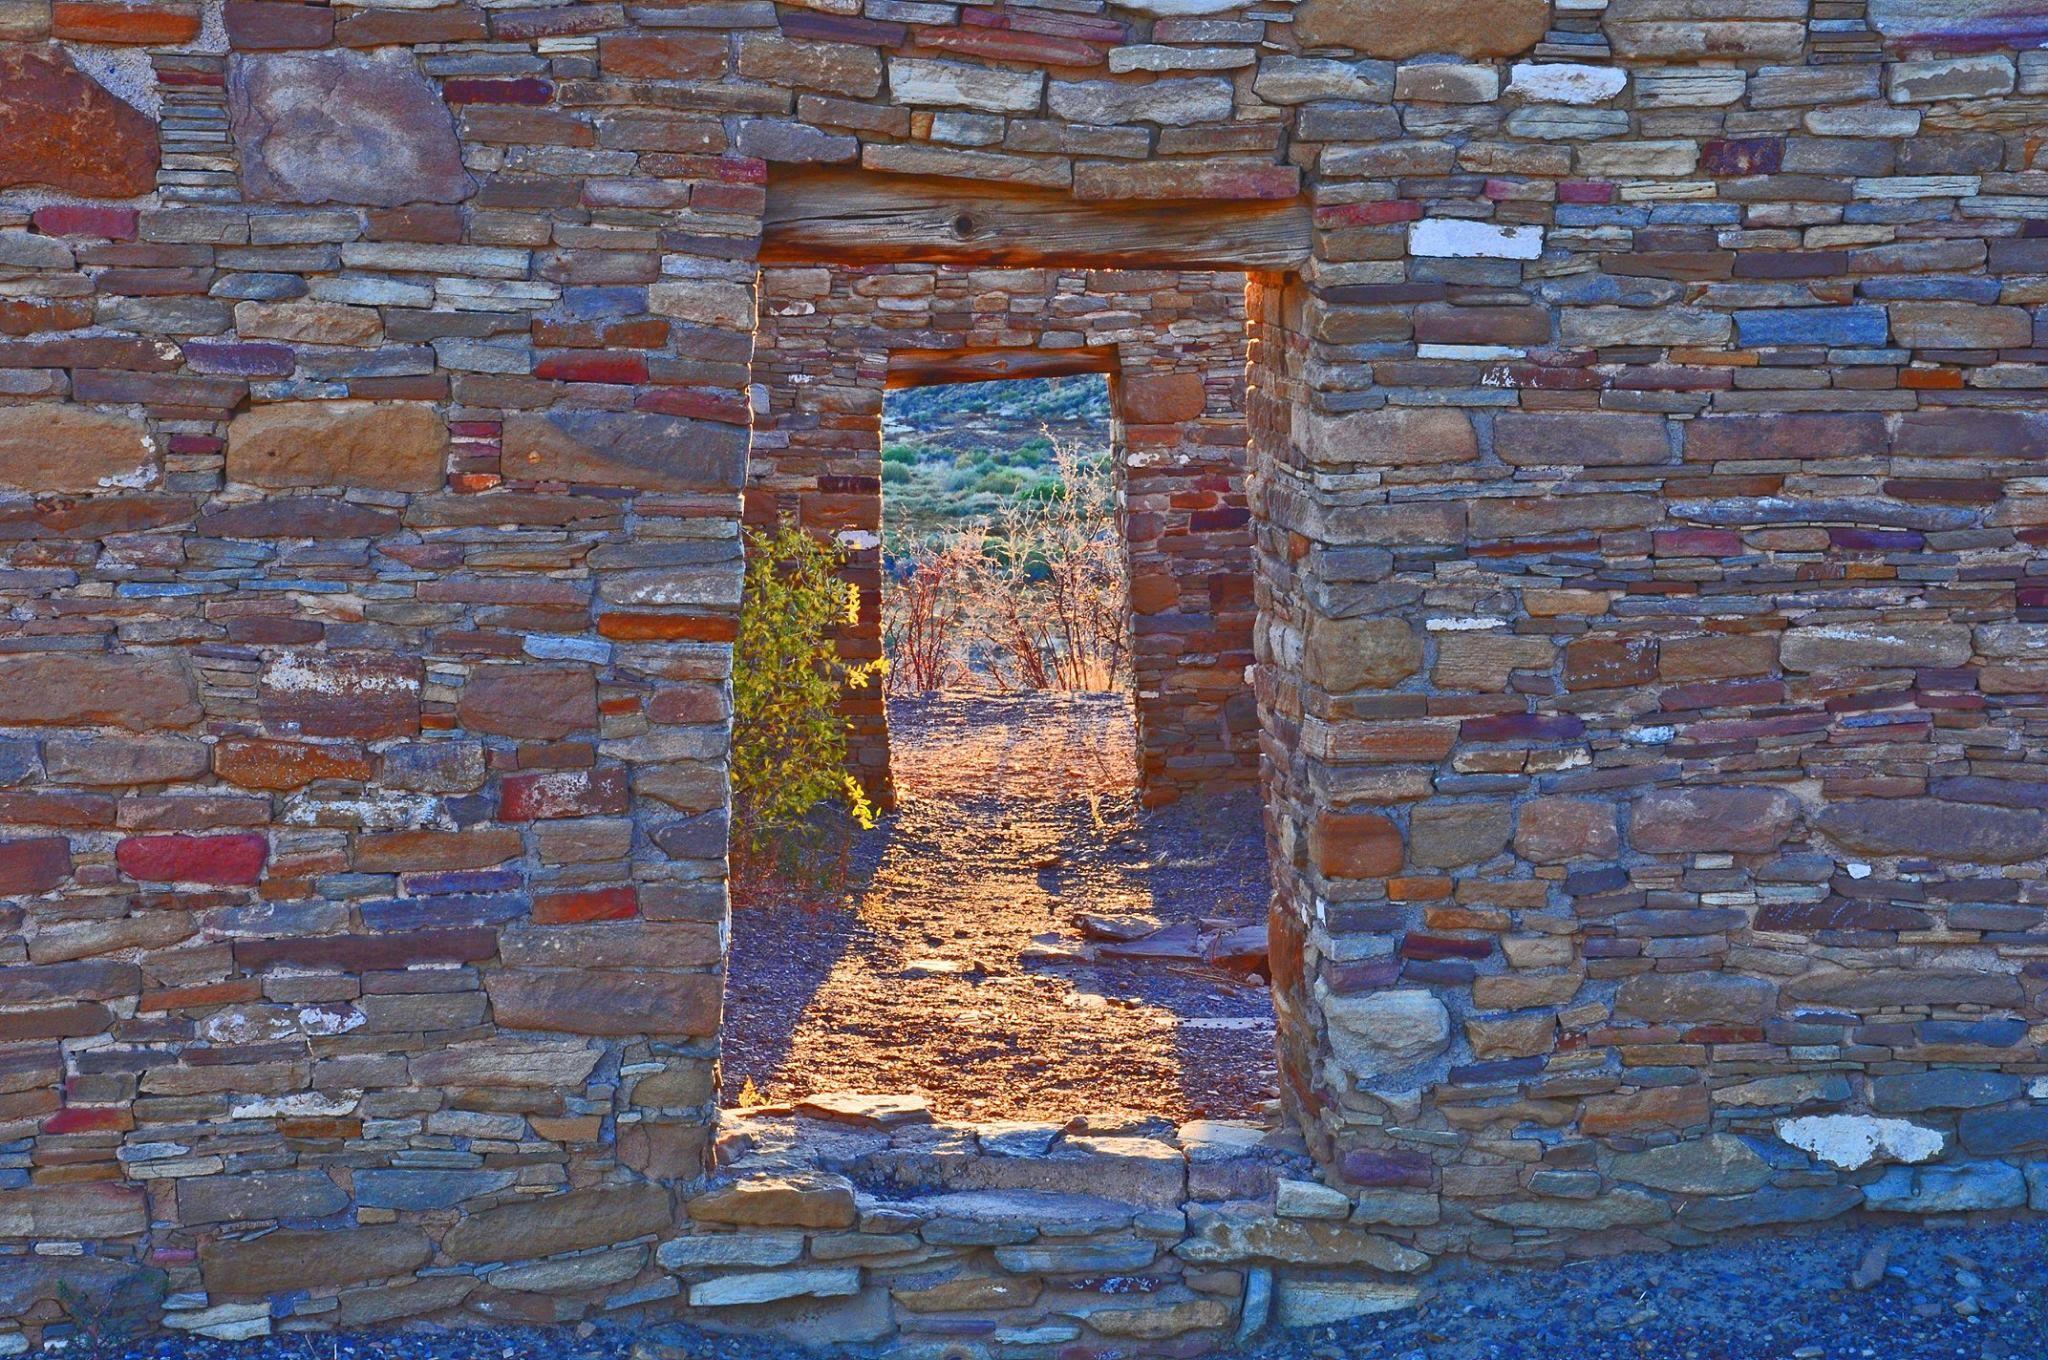 Colorful sandstone walls with two open sections in the middle that look like doorways.